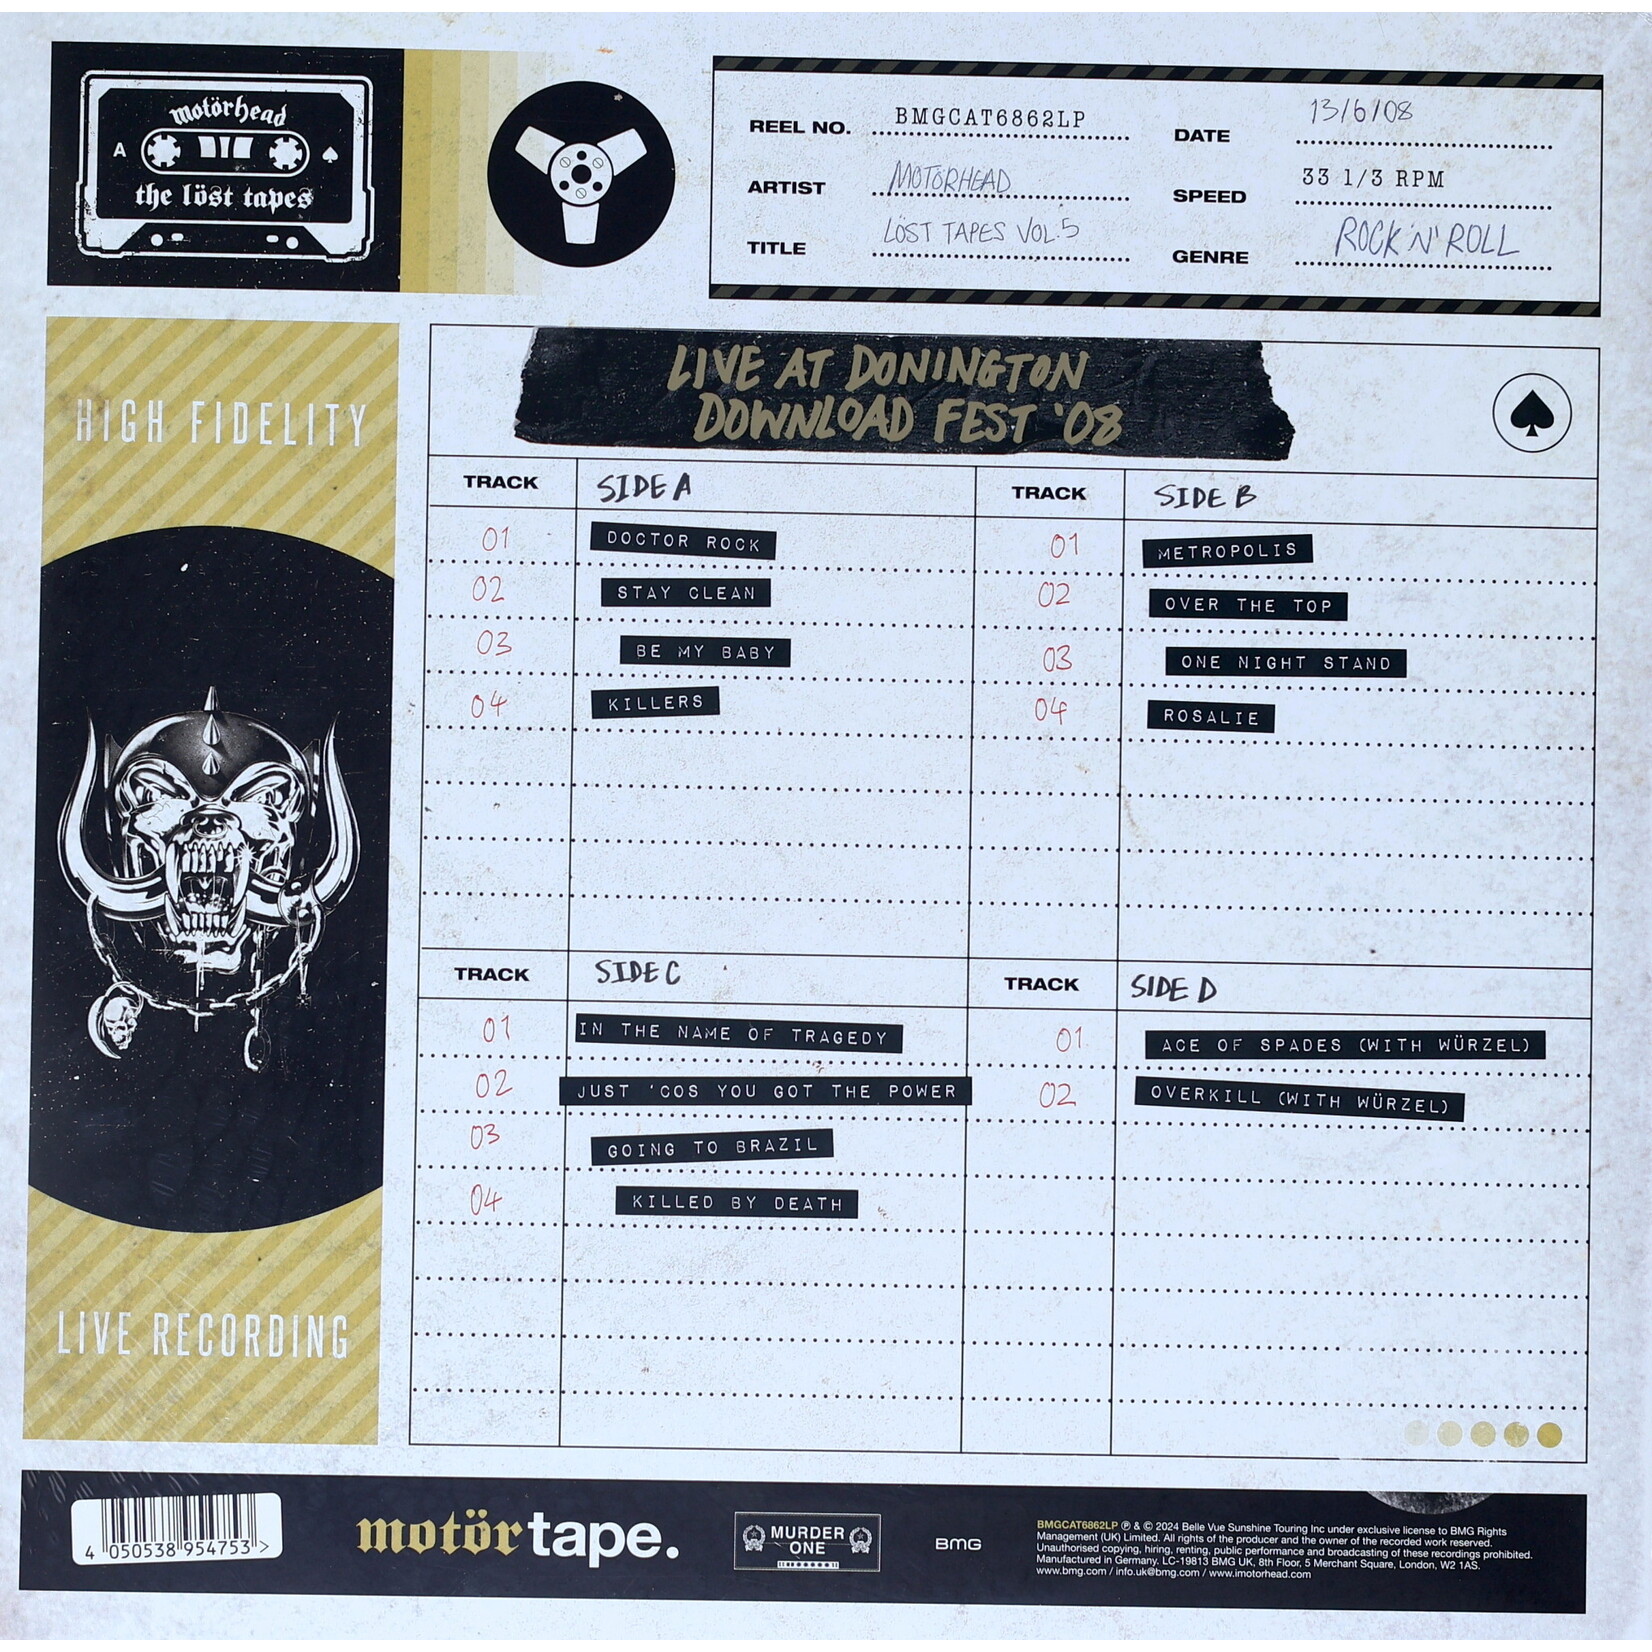 MOTORHEAD - THE LOST TAPES, VOL. 5 - GATEFOLD COLORED YELLOW 2LP